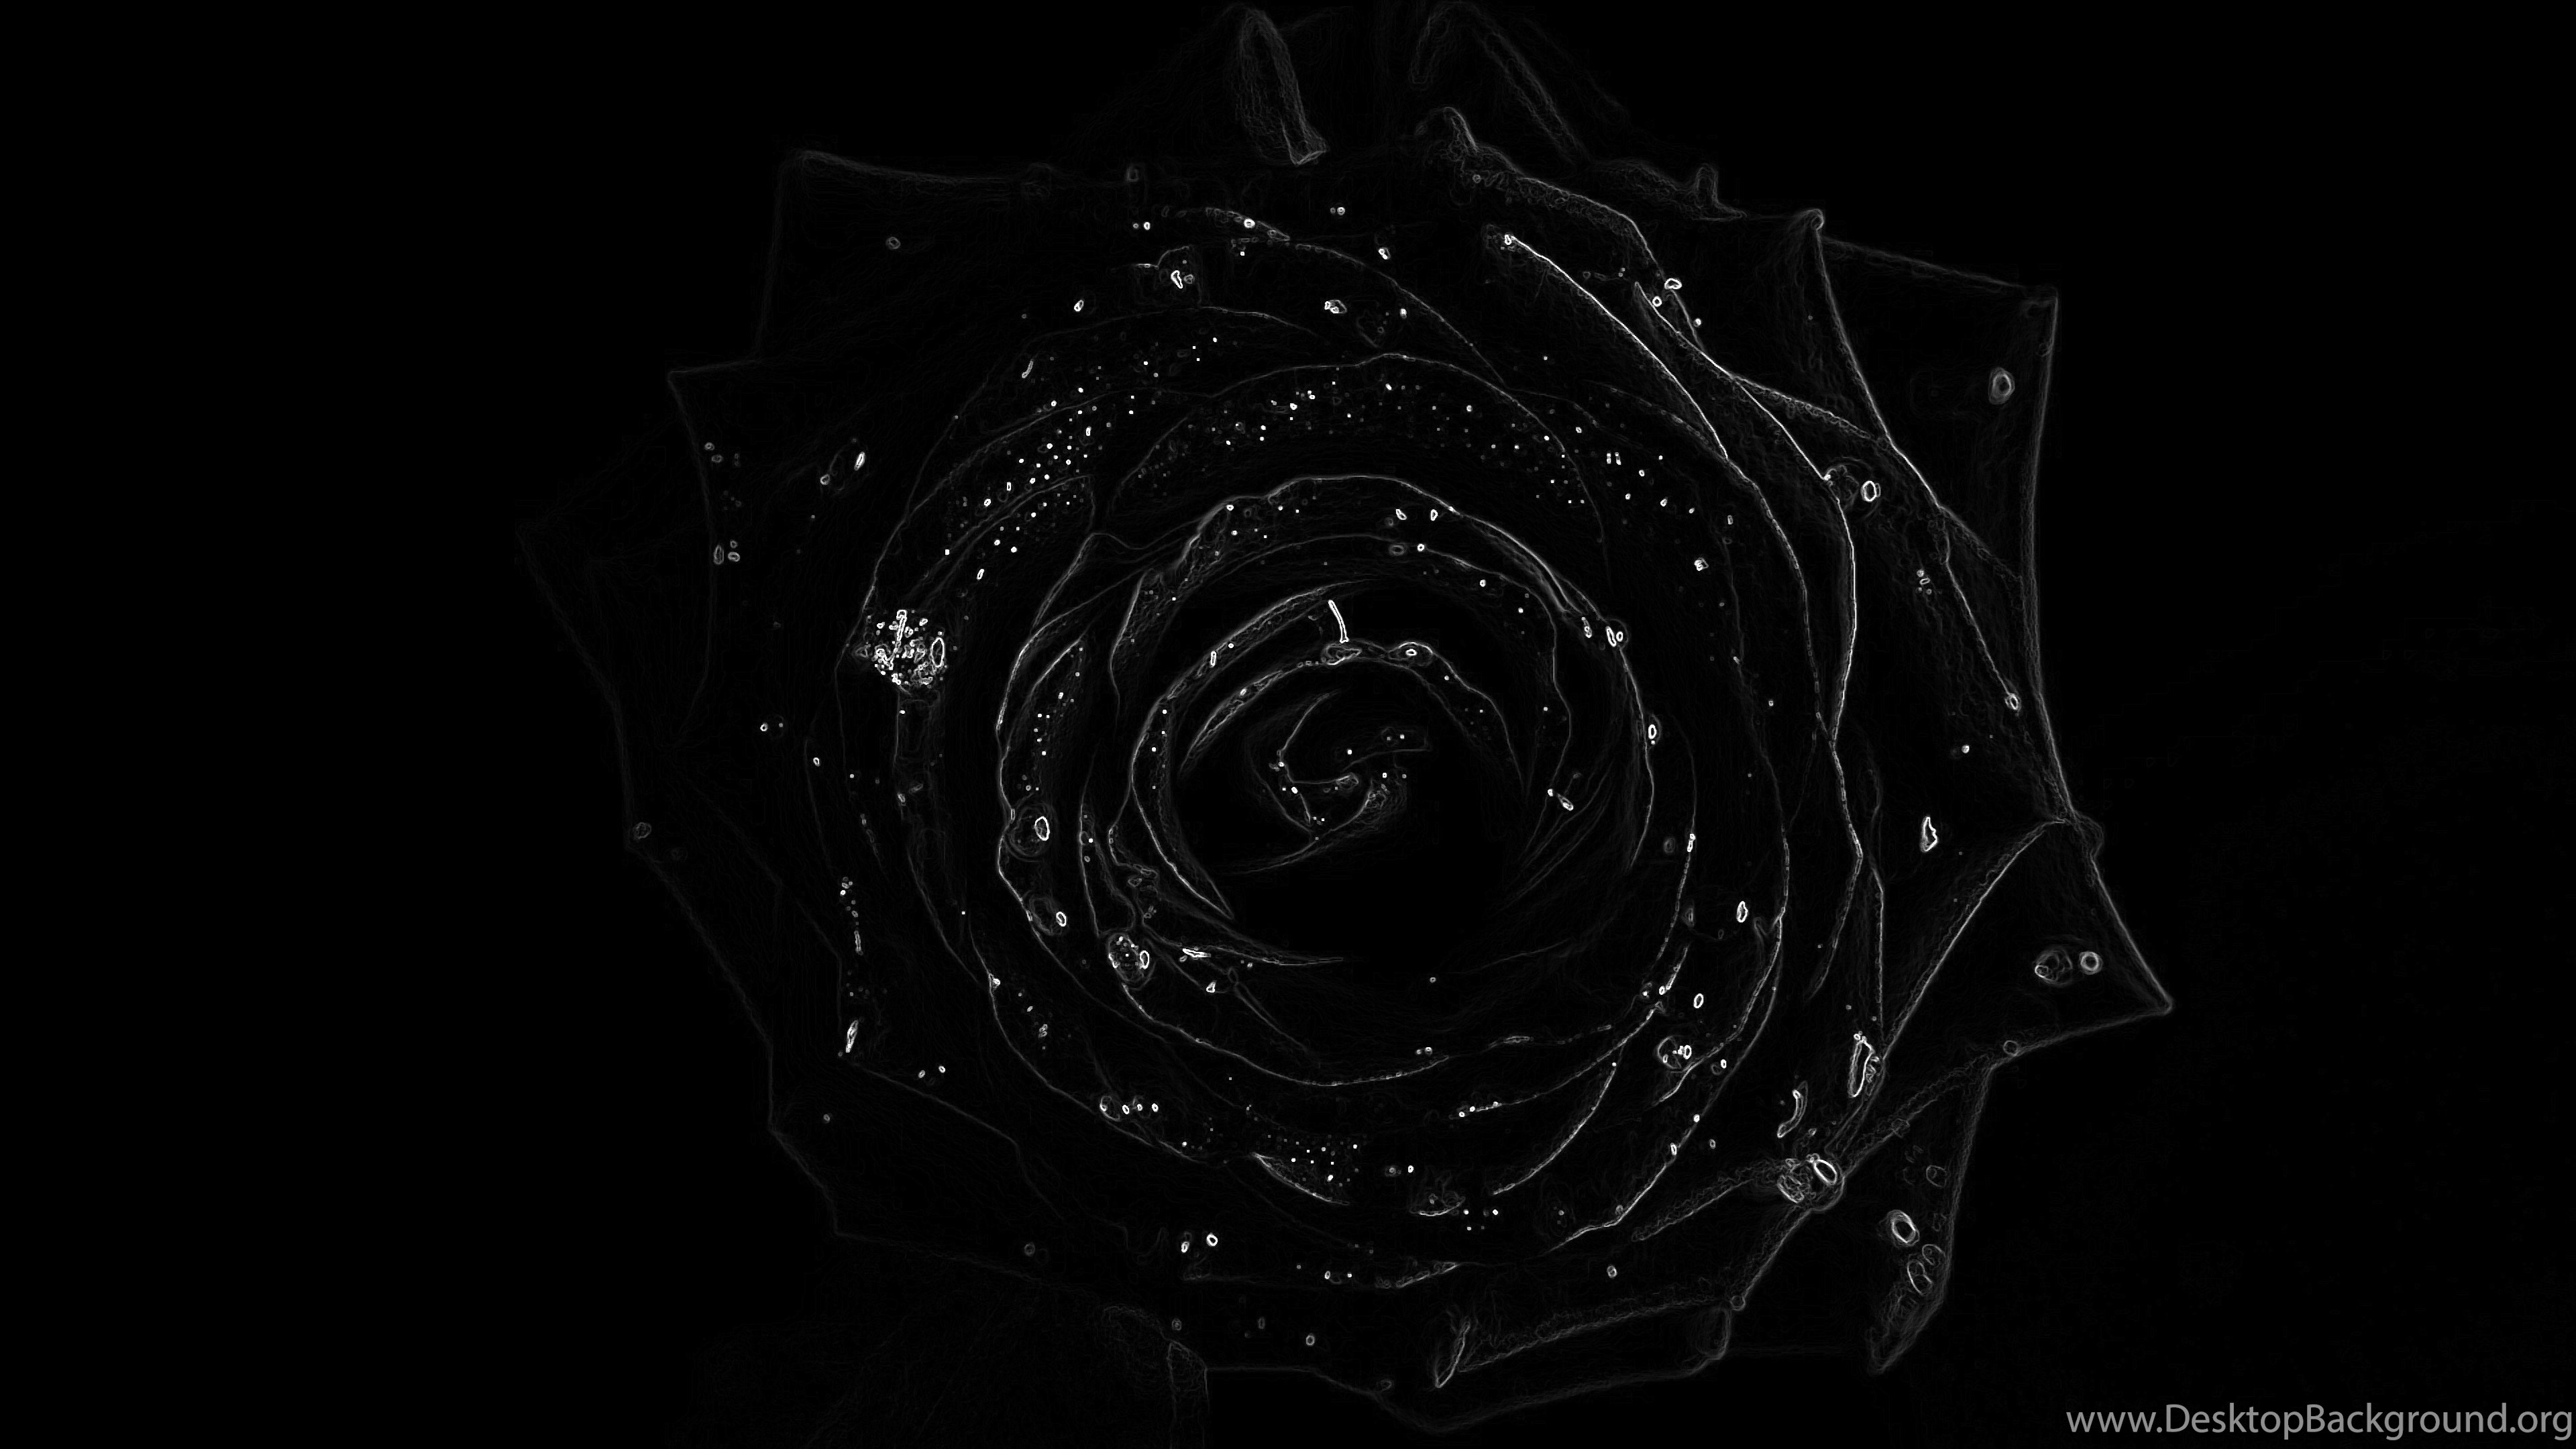 4K ULTRA HD  UHD 3840x2160 Black  Rose  Wallpapers  And 